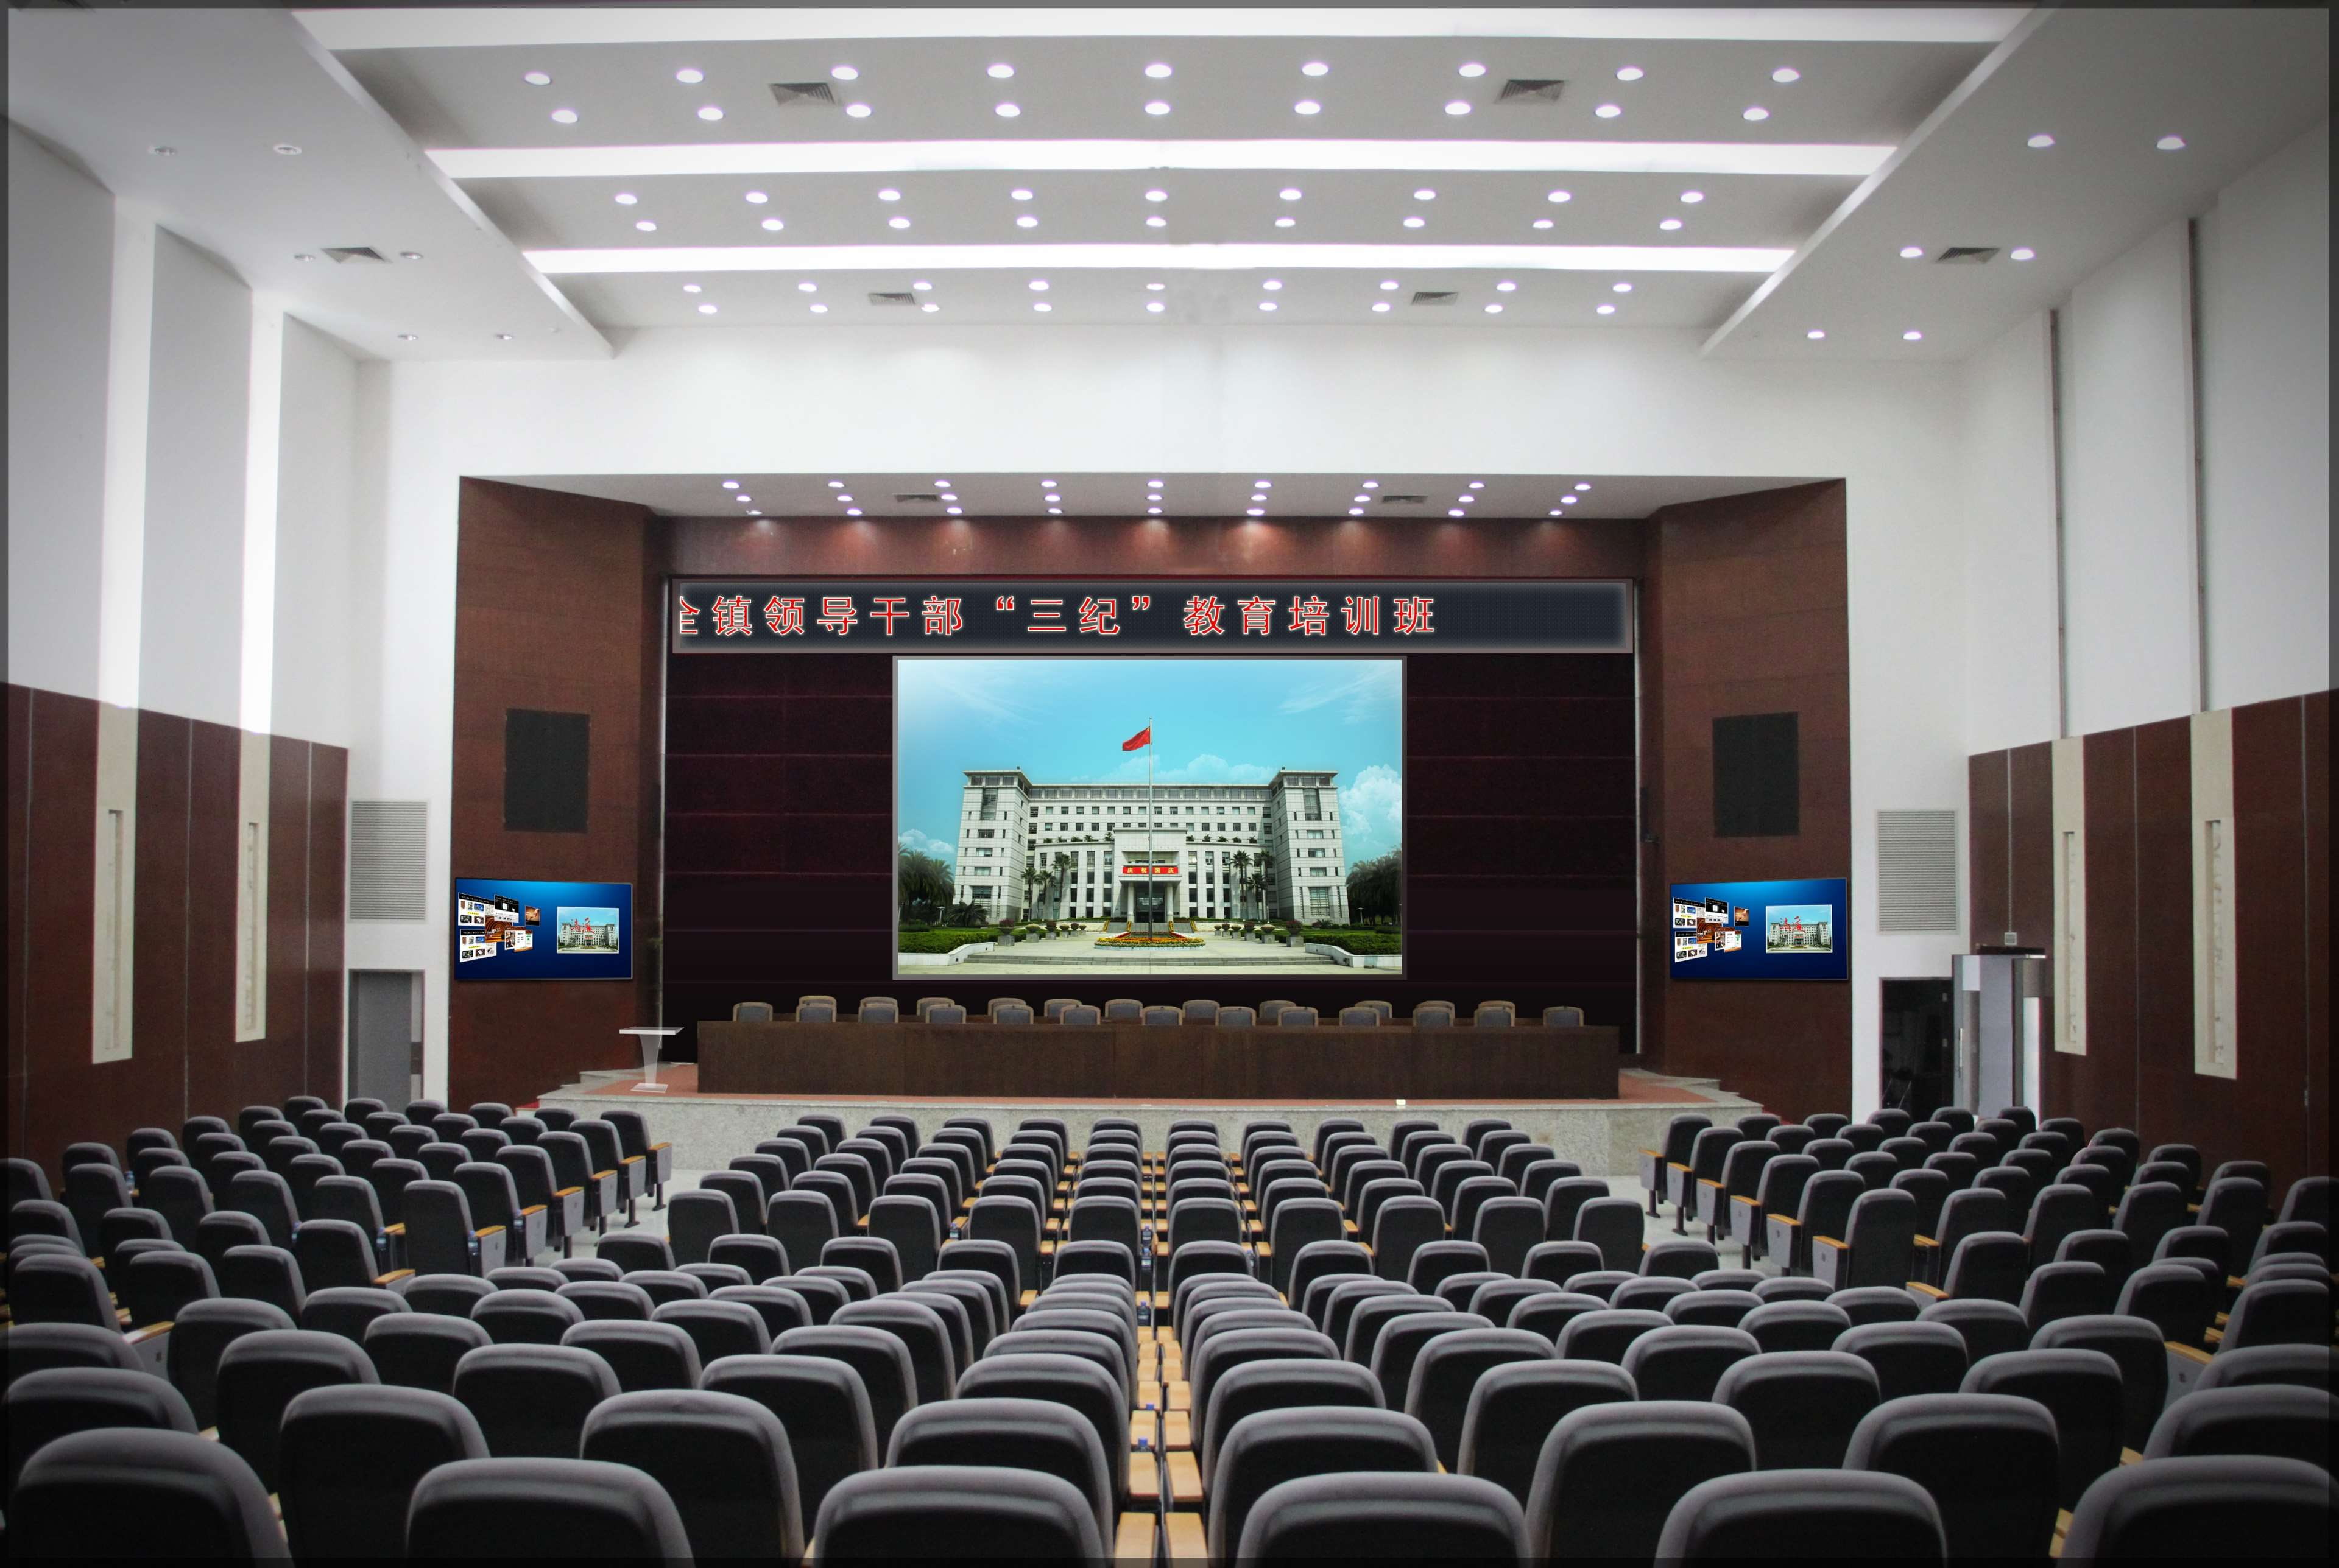 conference, effect picture, hall, indoors, interior, interior design